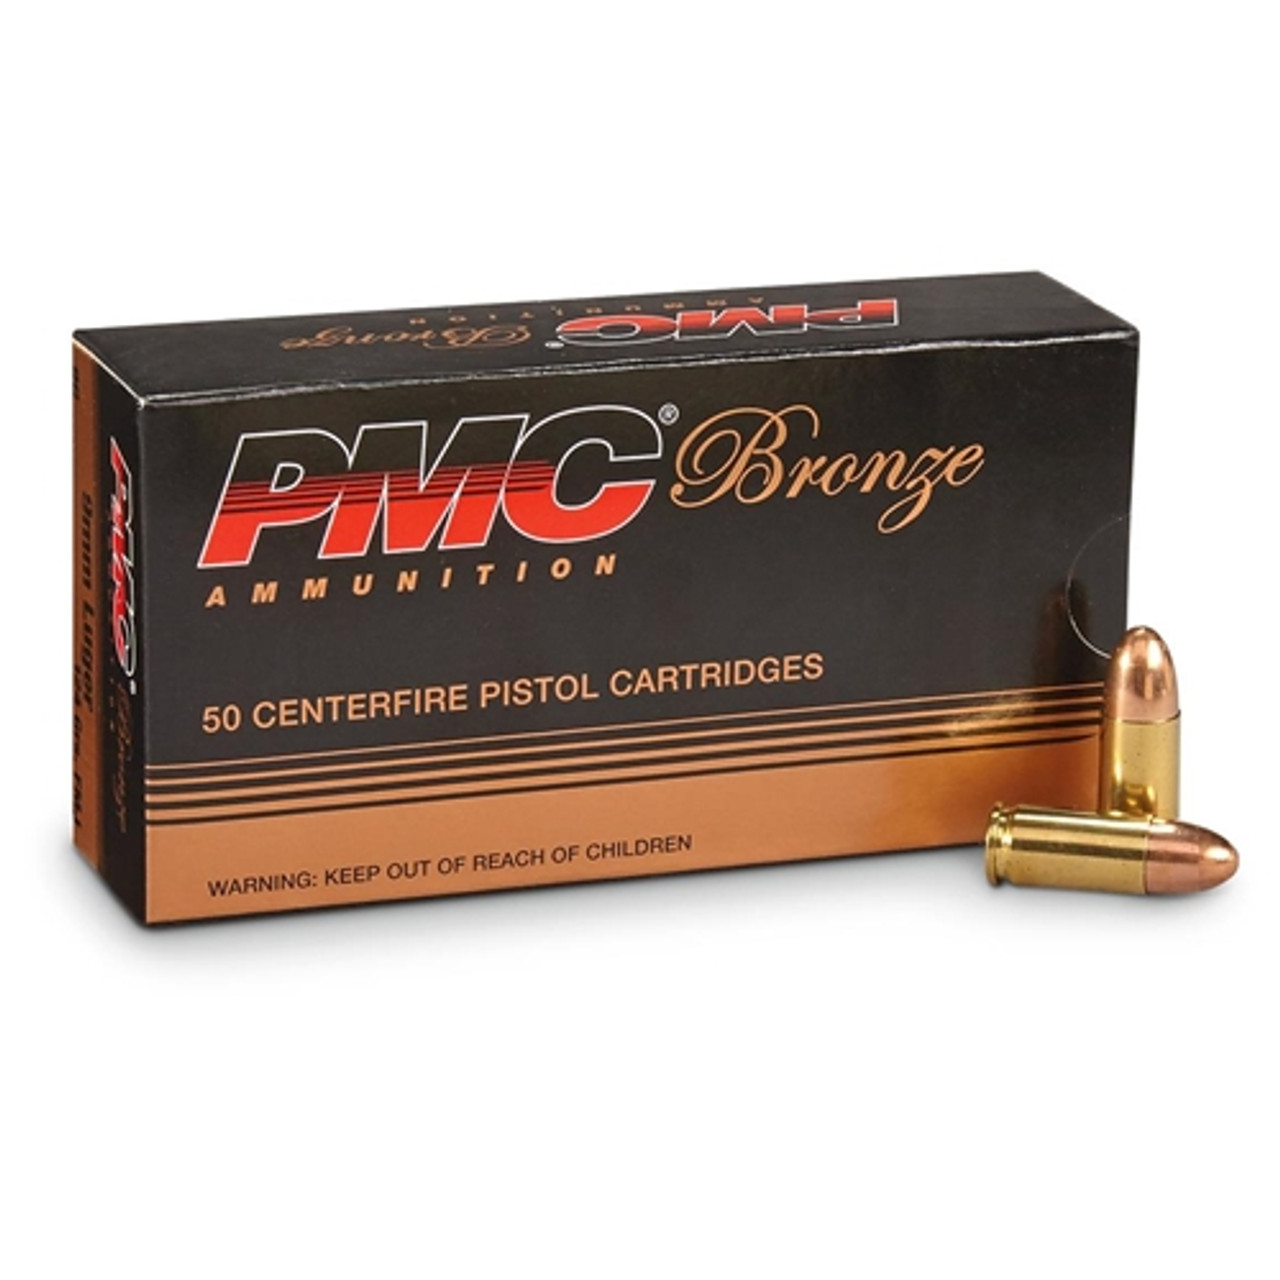 .9mm ammo for sale